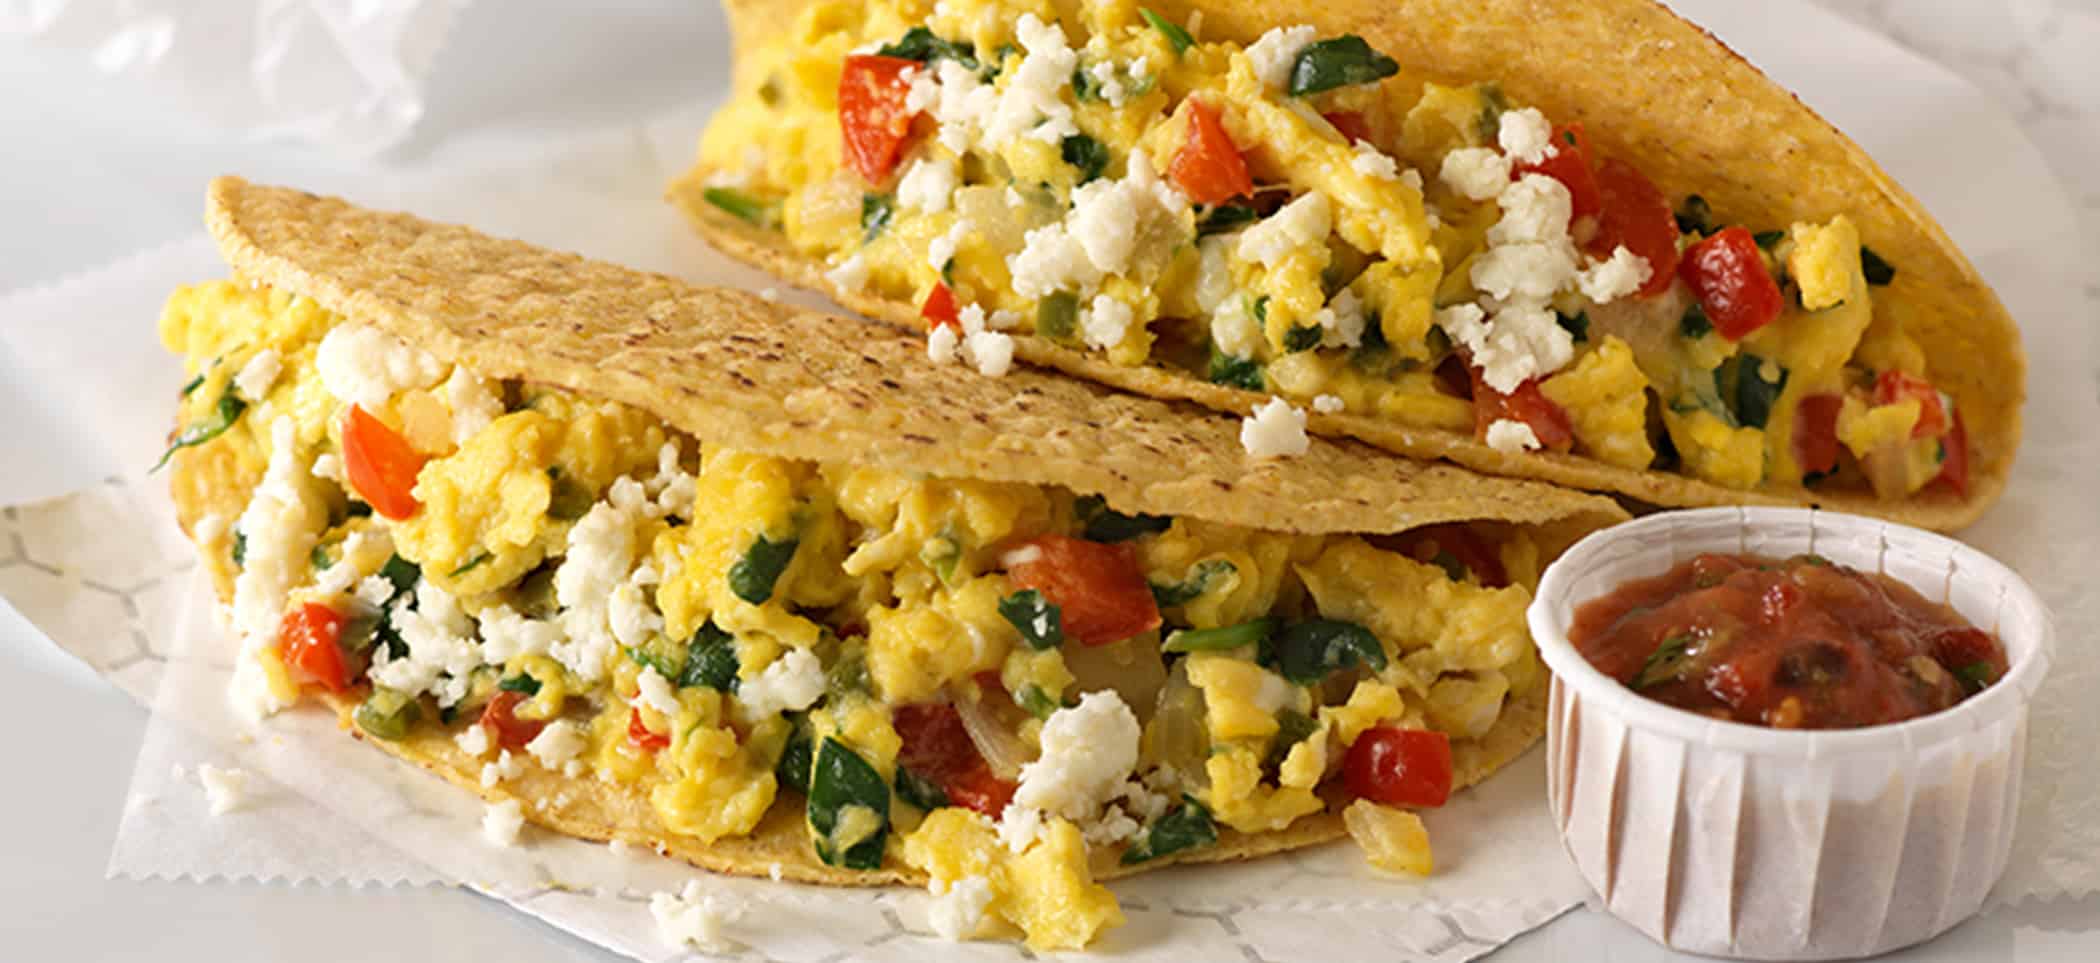 Spinach Breakfast Tacos